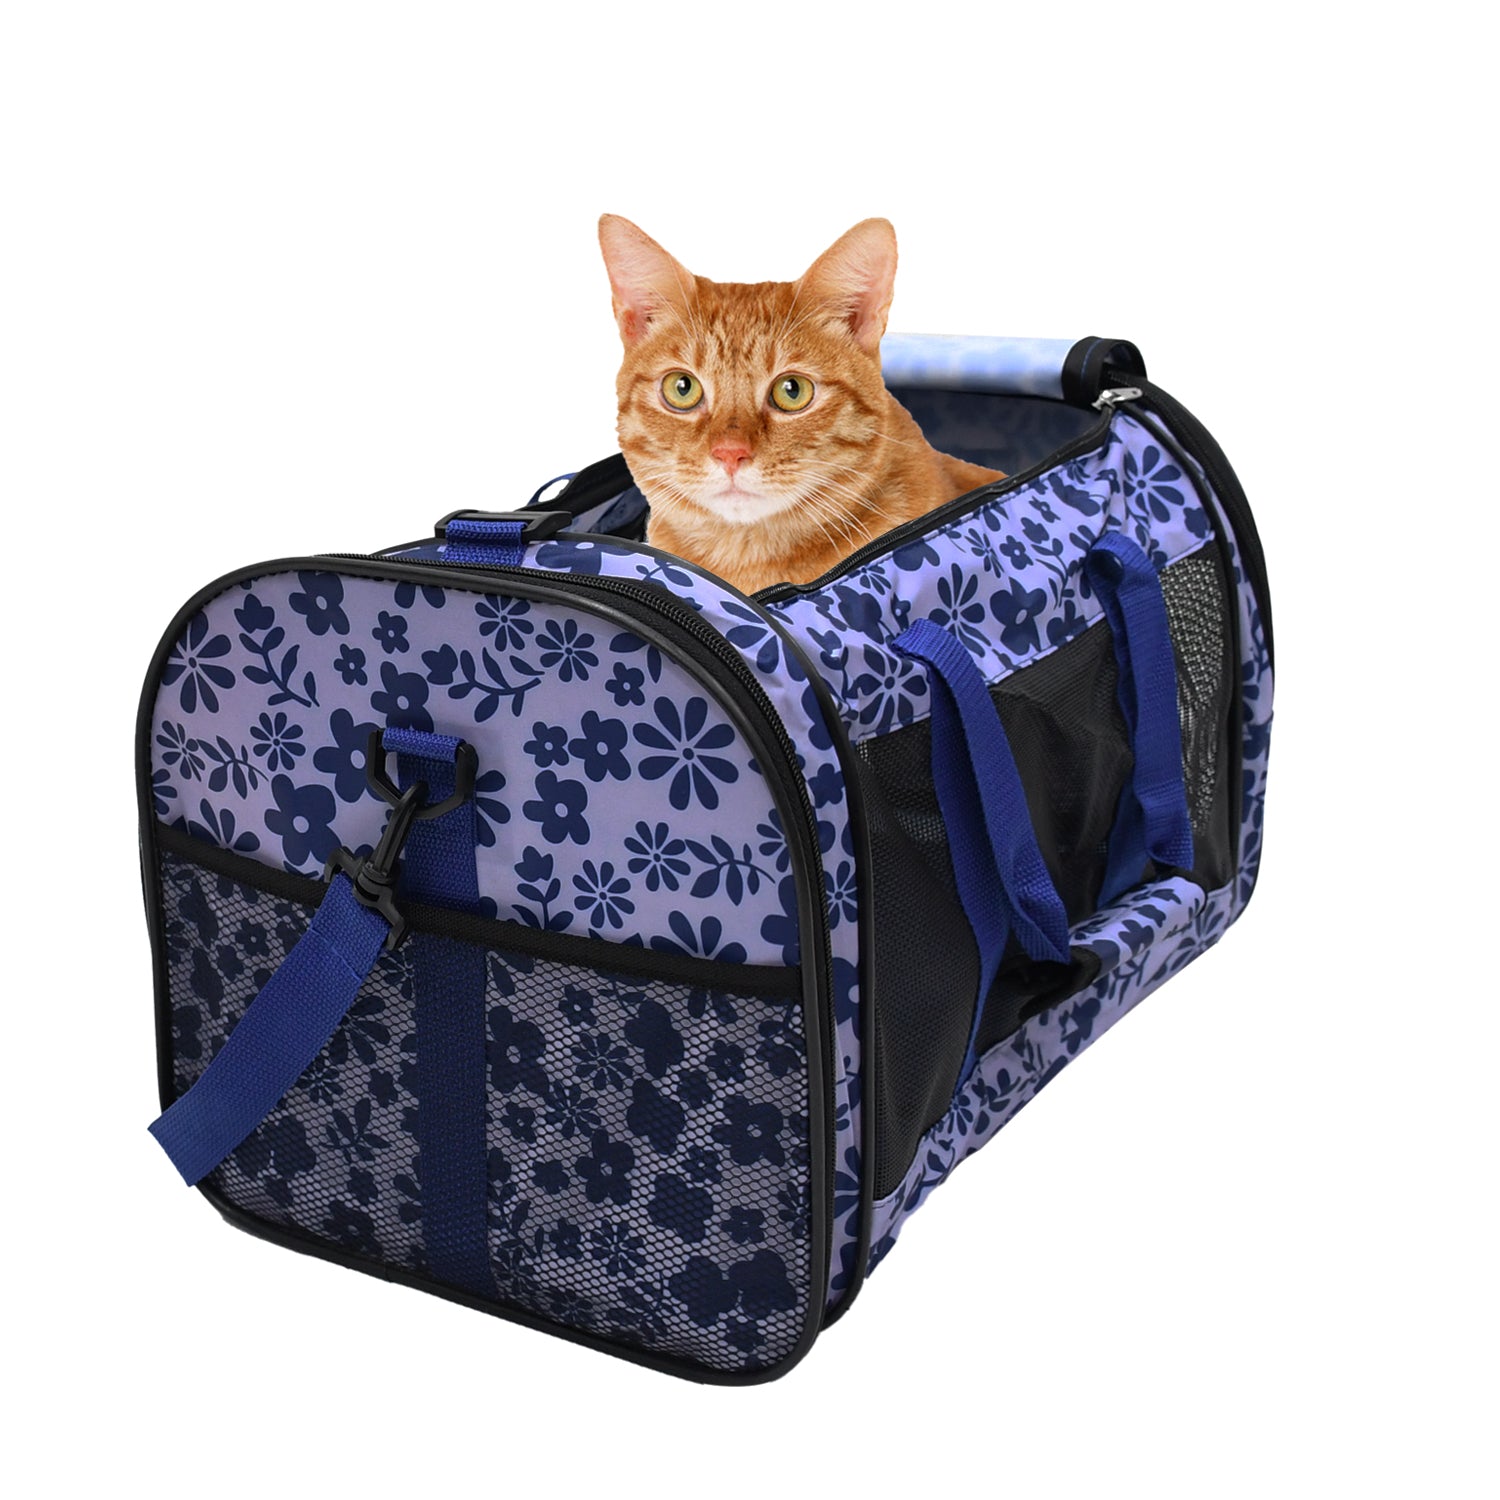 GOOPAWS Soft-Sided Small Dog Cat Carrier Bag, Floral Print Blue